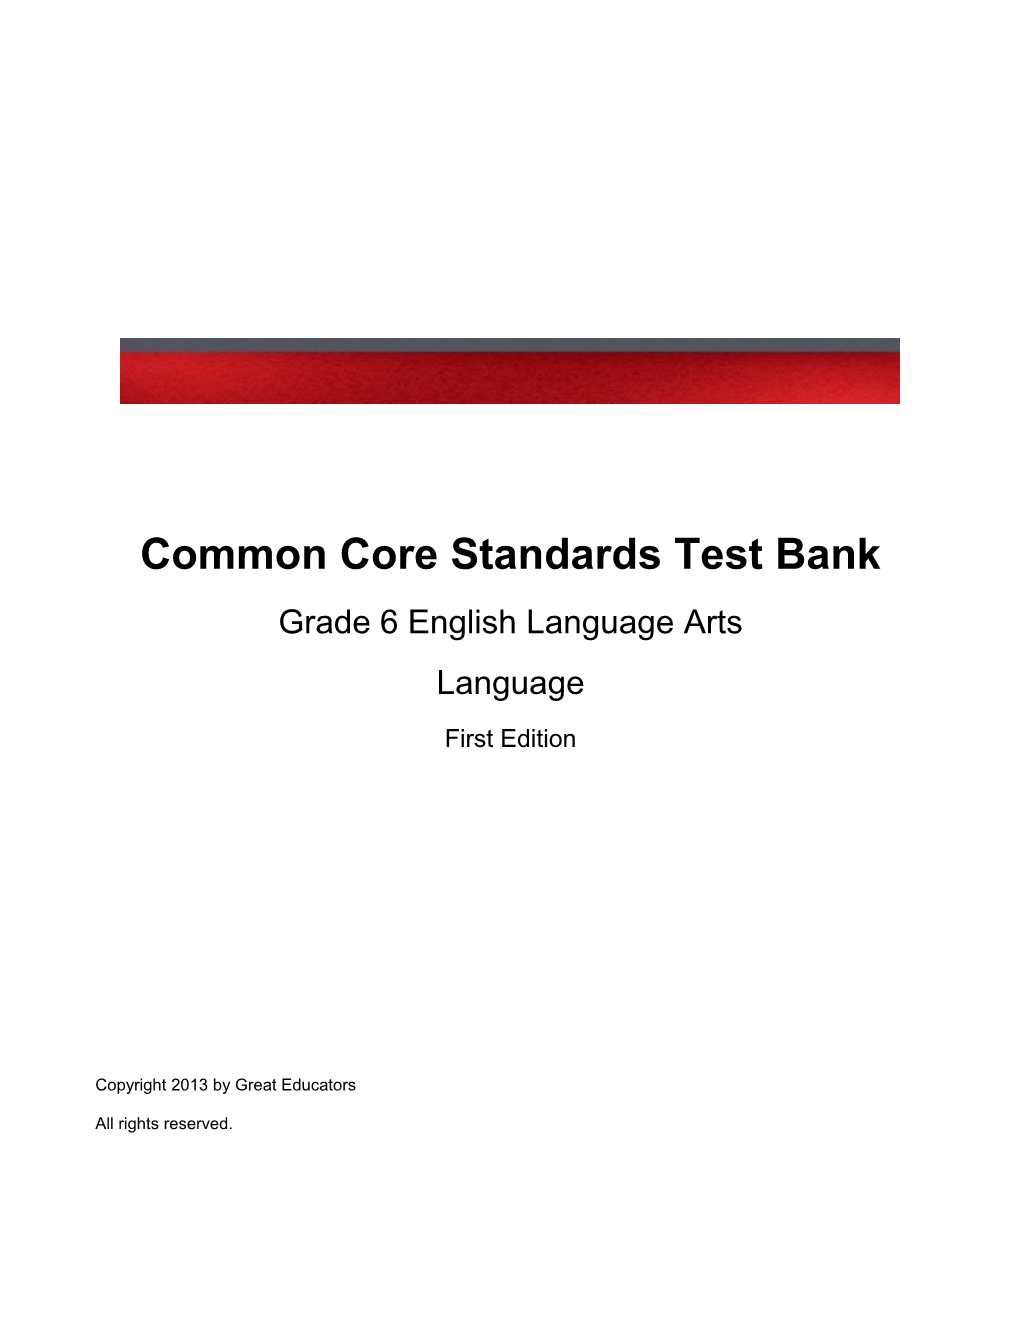 Common Core Standards Test Bank